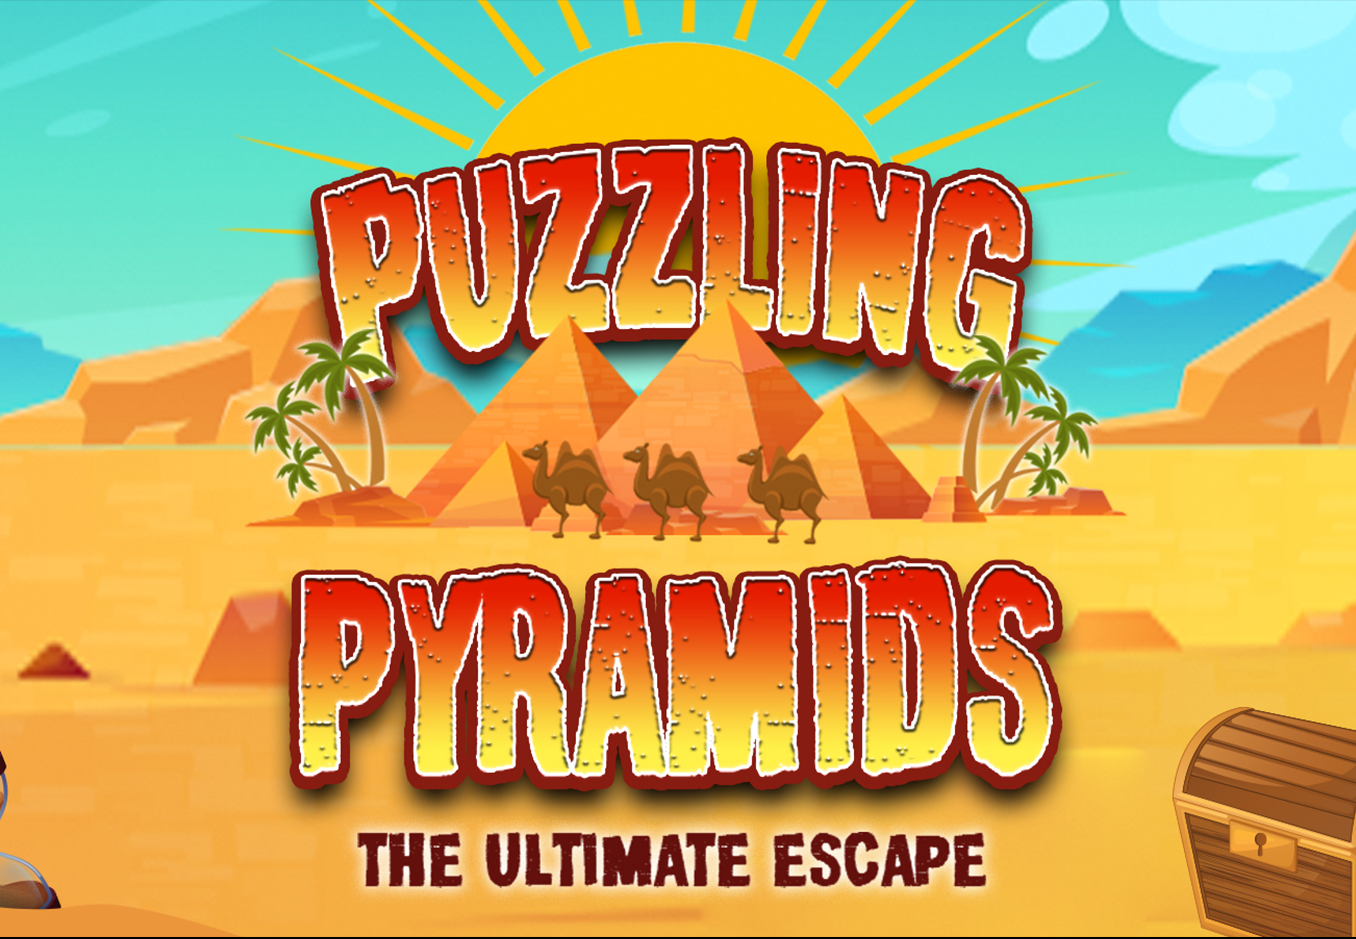 Puzzling Pyramids 5-Day VBS Curriculum